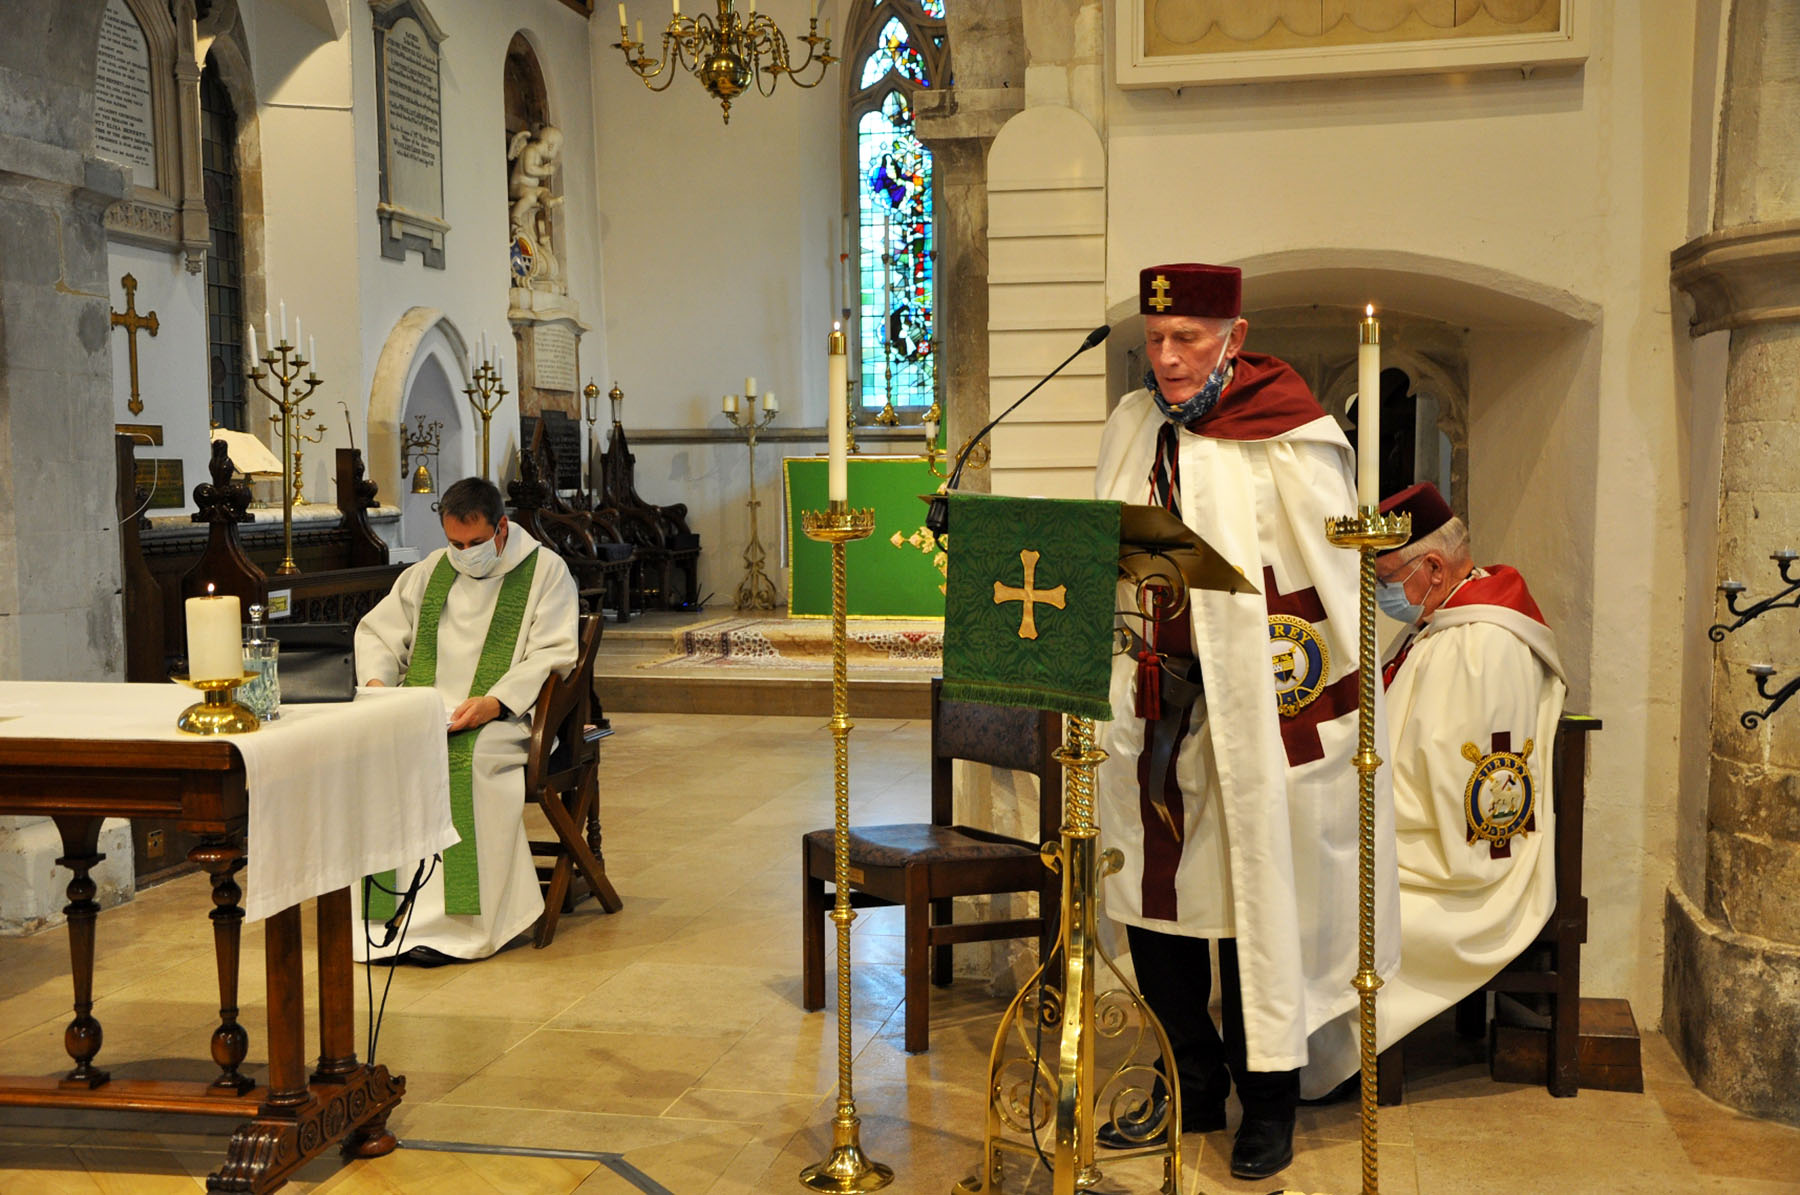 Provincial Priory of Surrey - Service of Rededication and Thanksgiving